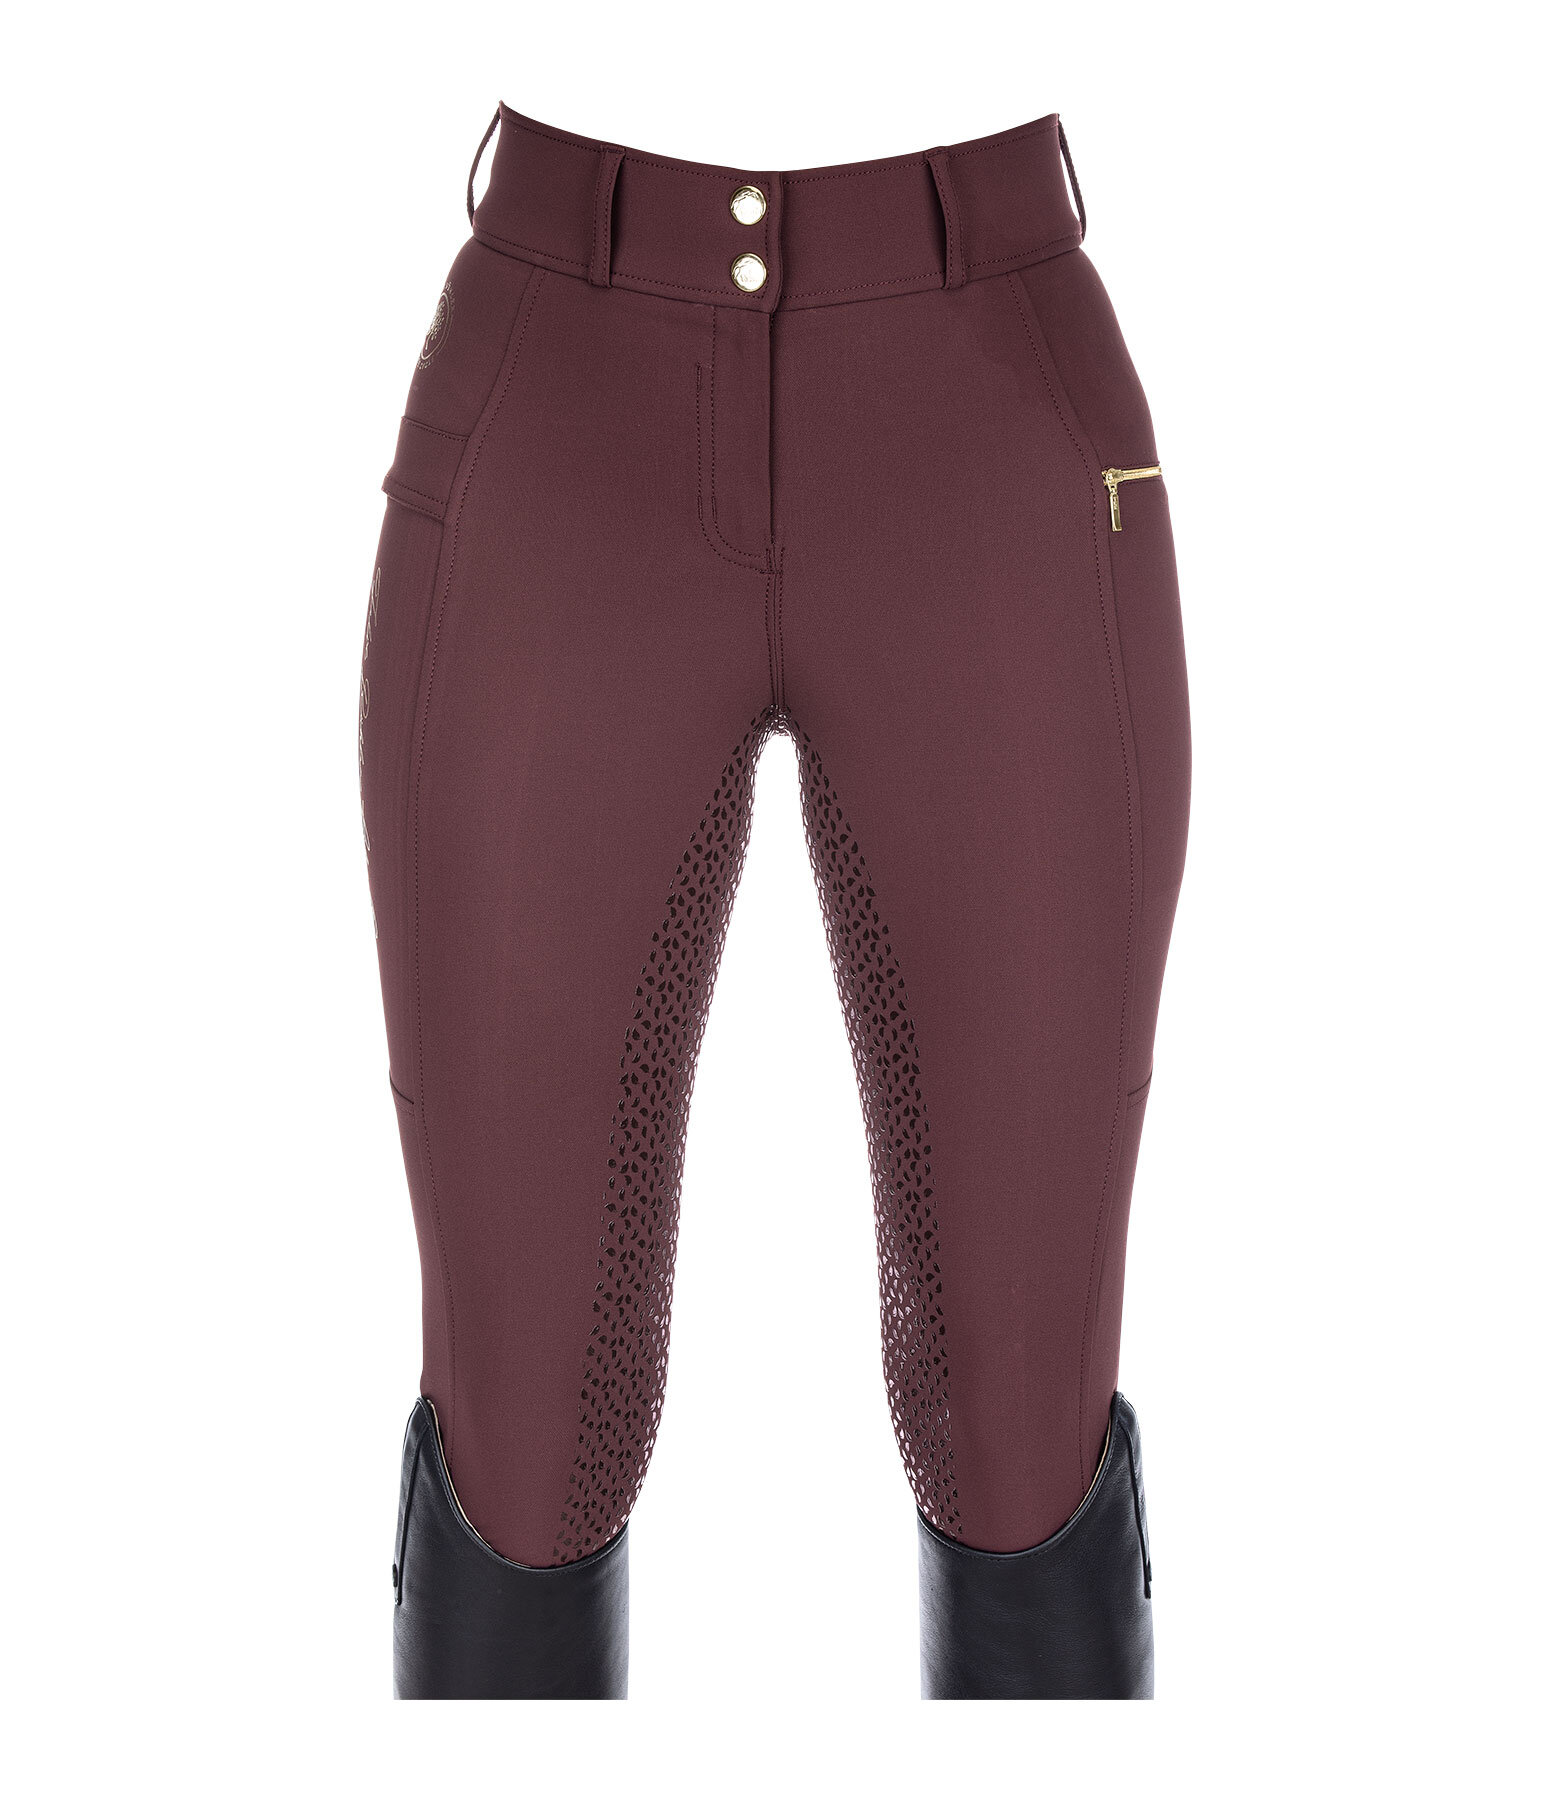 Grip Full-Seat Breeches Life Cycle